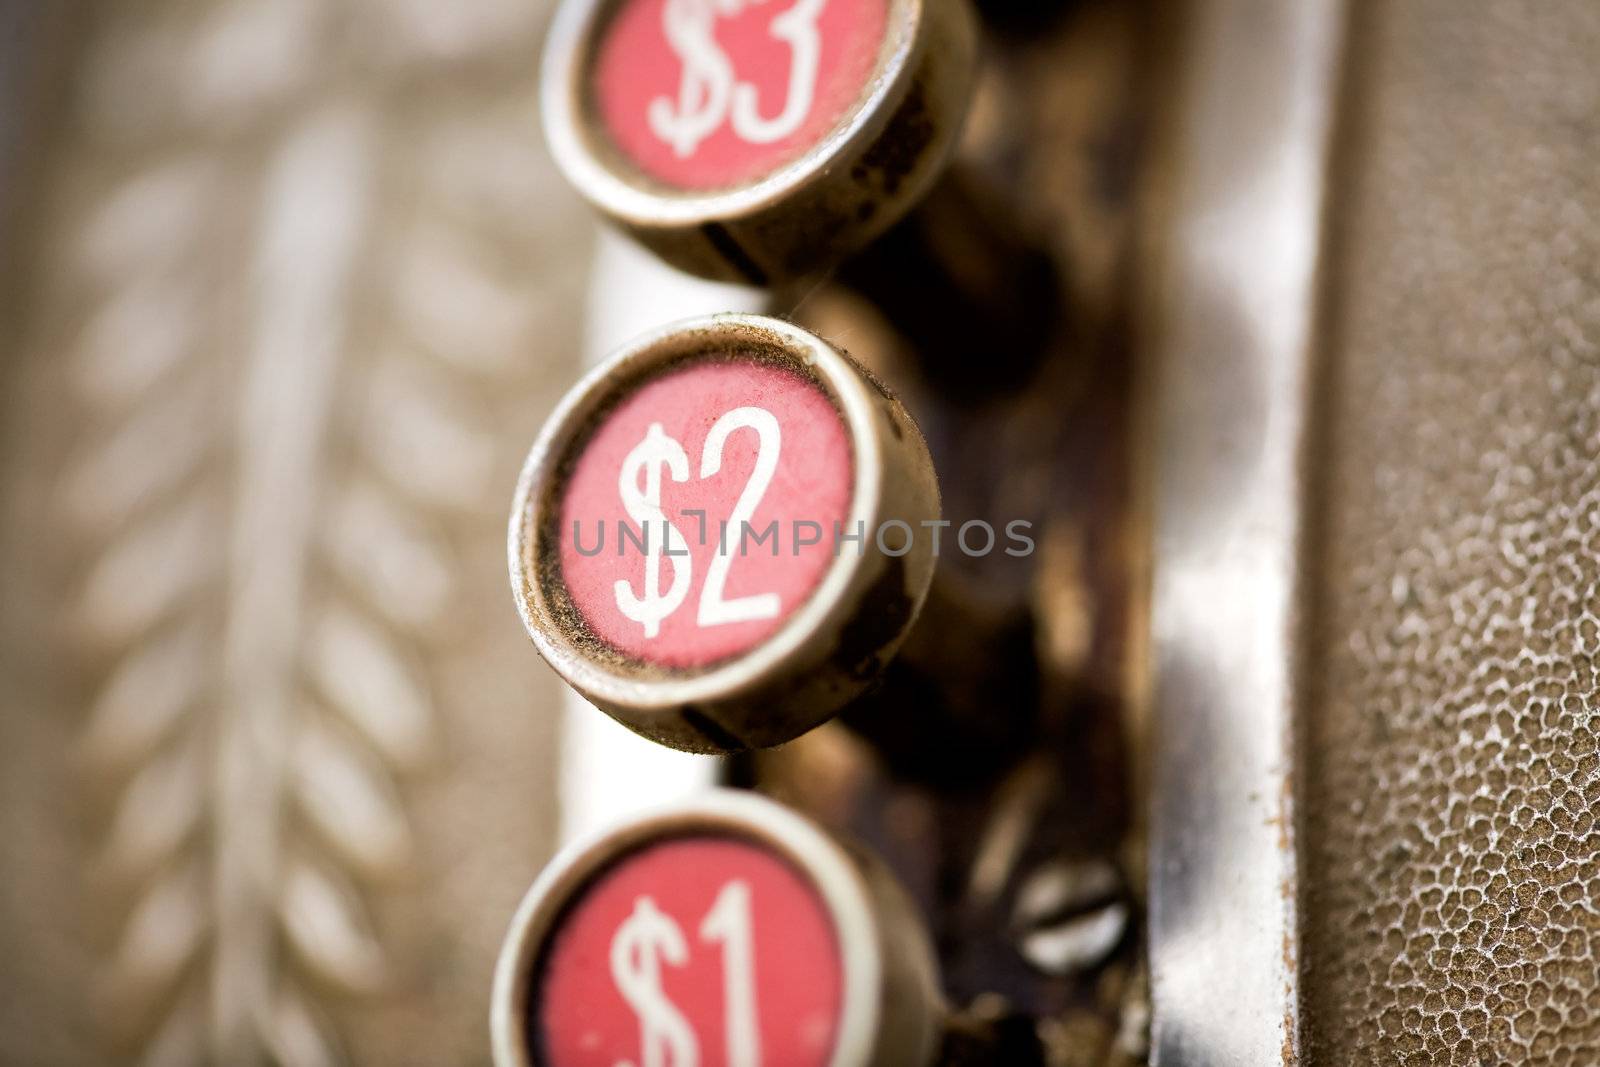 A 2 dollar button on a retro dirty cash register - shallow depth of field